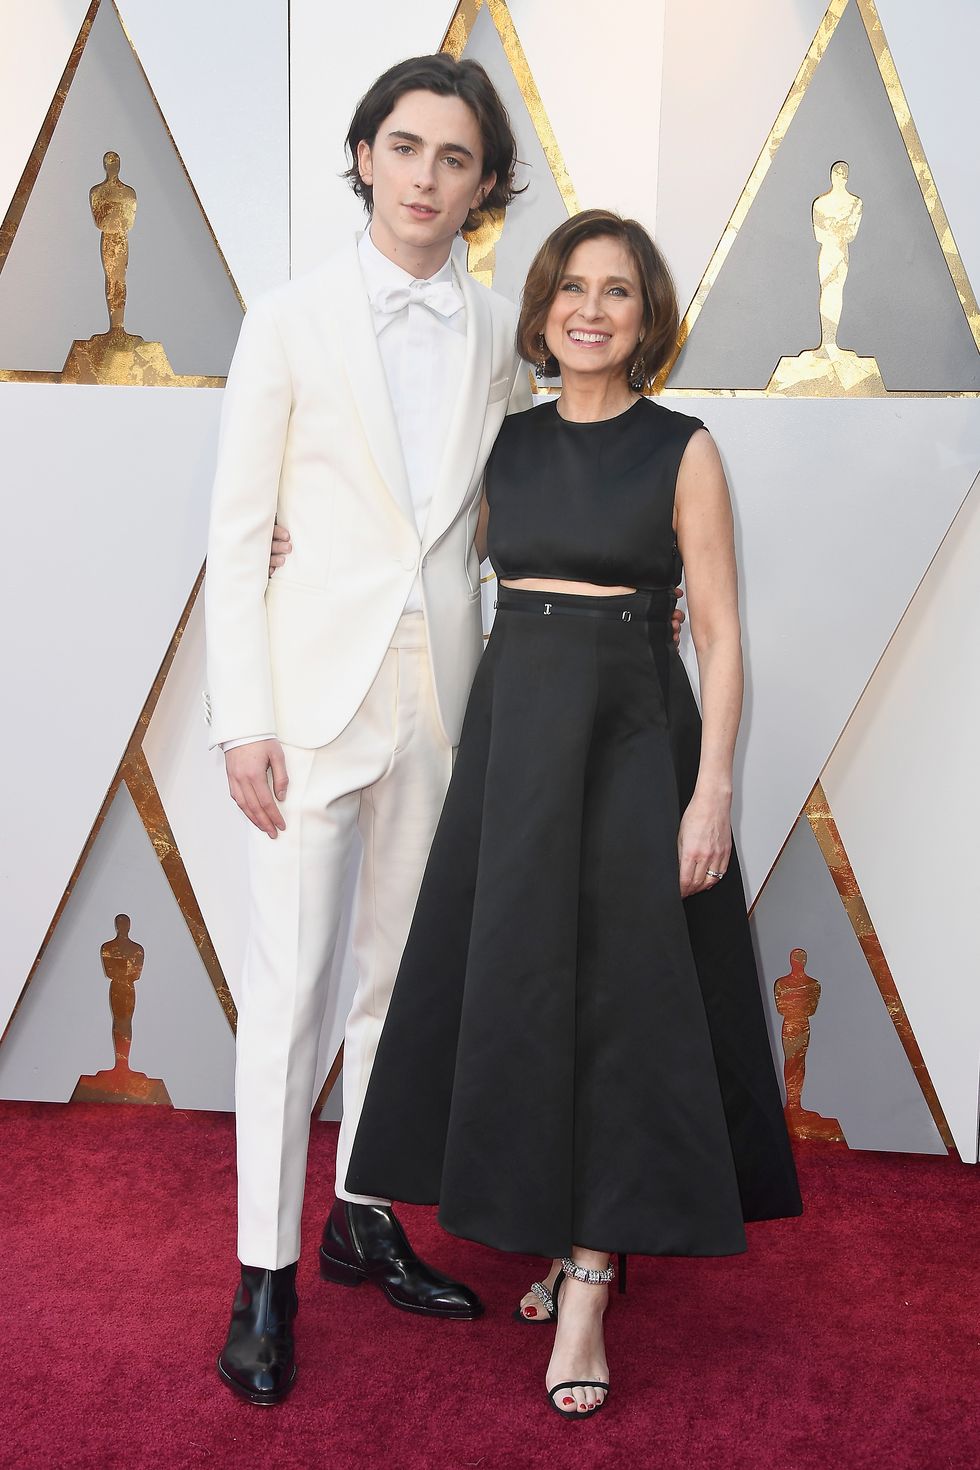 Timothée Chalamet Brought His Mom To The 2018 Oscars